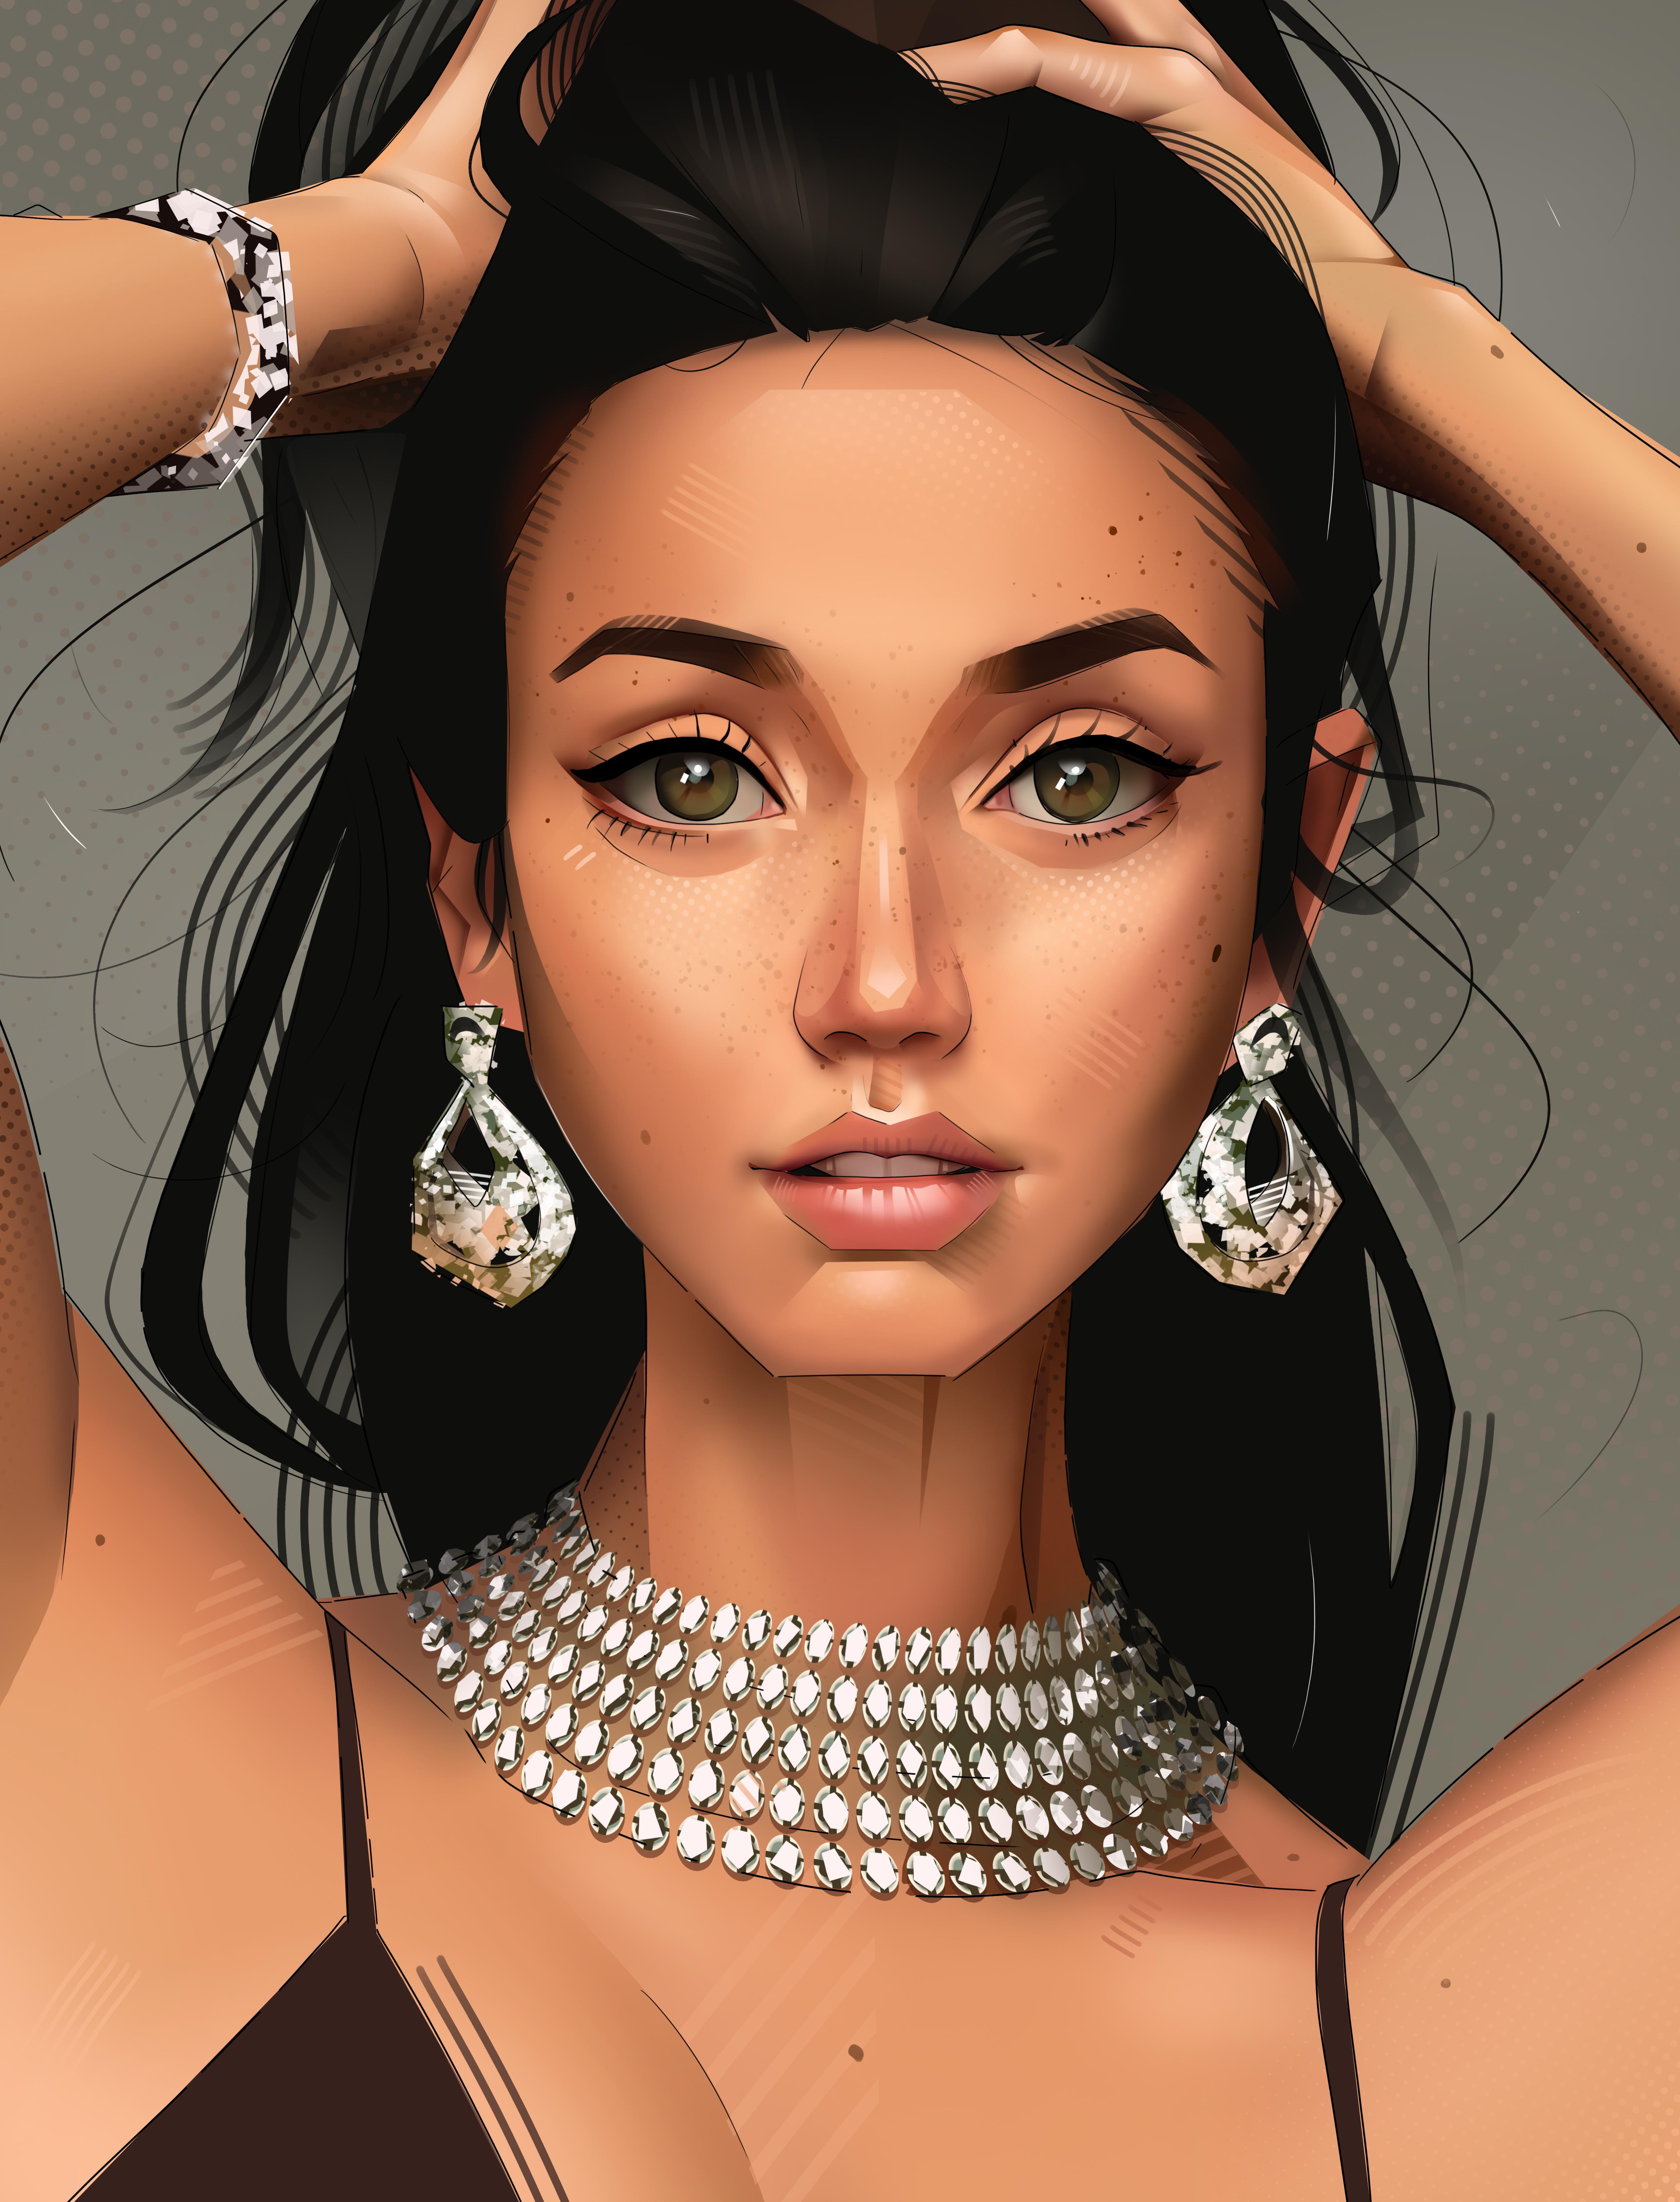 General 5000x6554 artwork hand(s) in hair necklace diamond earrings Lilliepad97 digital art Ana de Armas women portrait display face parted lips black hair looking at viewer jewelry simple background earring